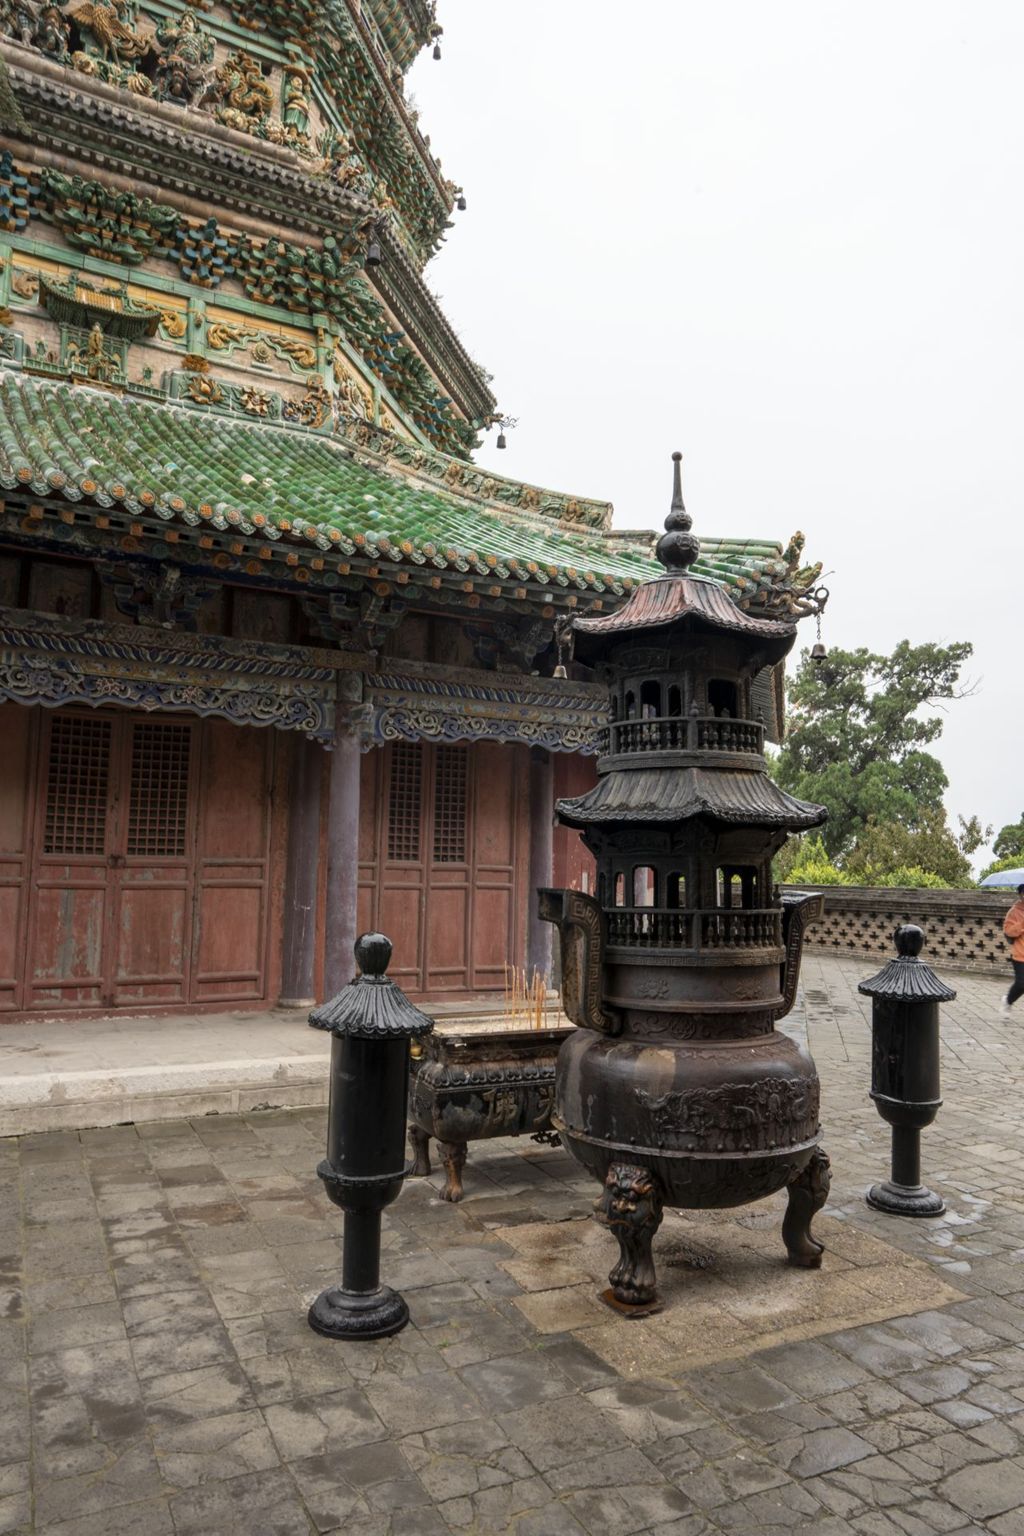 Miniature of Upper Guangsheng Temple, Flying Rainbow Tower (or Feihong Pagoda) and incense burner